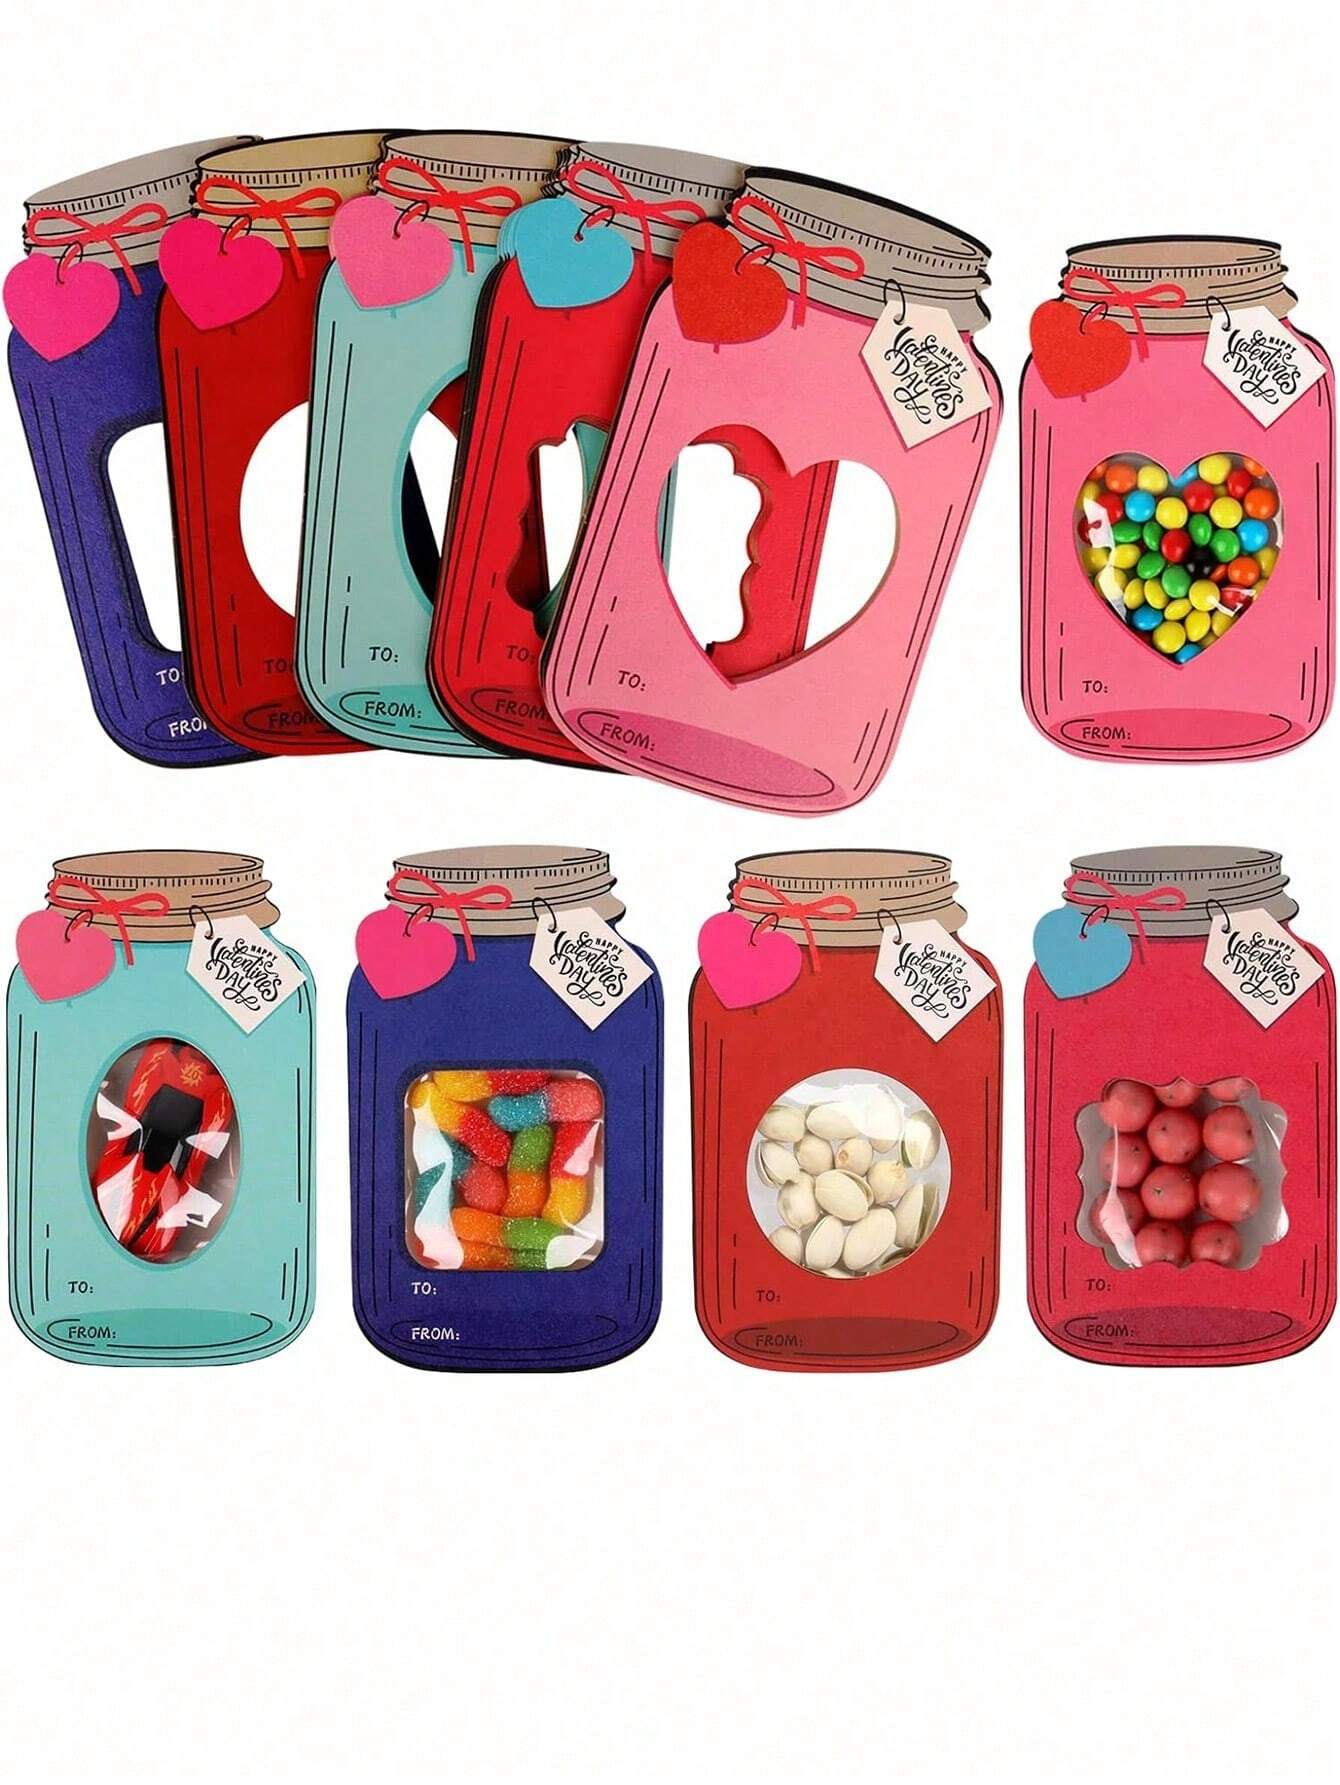 50 Pack Valentines Cards , Mason Jar Happy Valentines Day Cards, Funny Valentine Gifts For Classroom, Valentines Day Cards For School Exchange Party Favors(Candy Not Included)